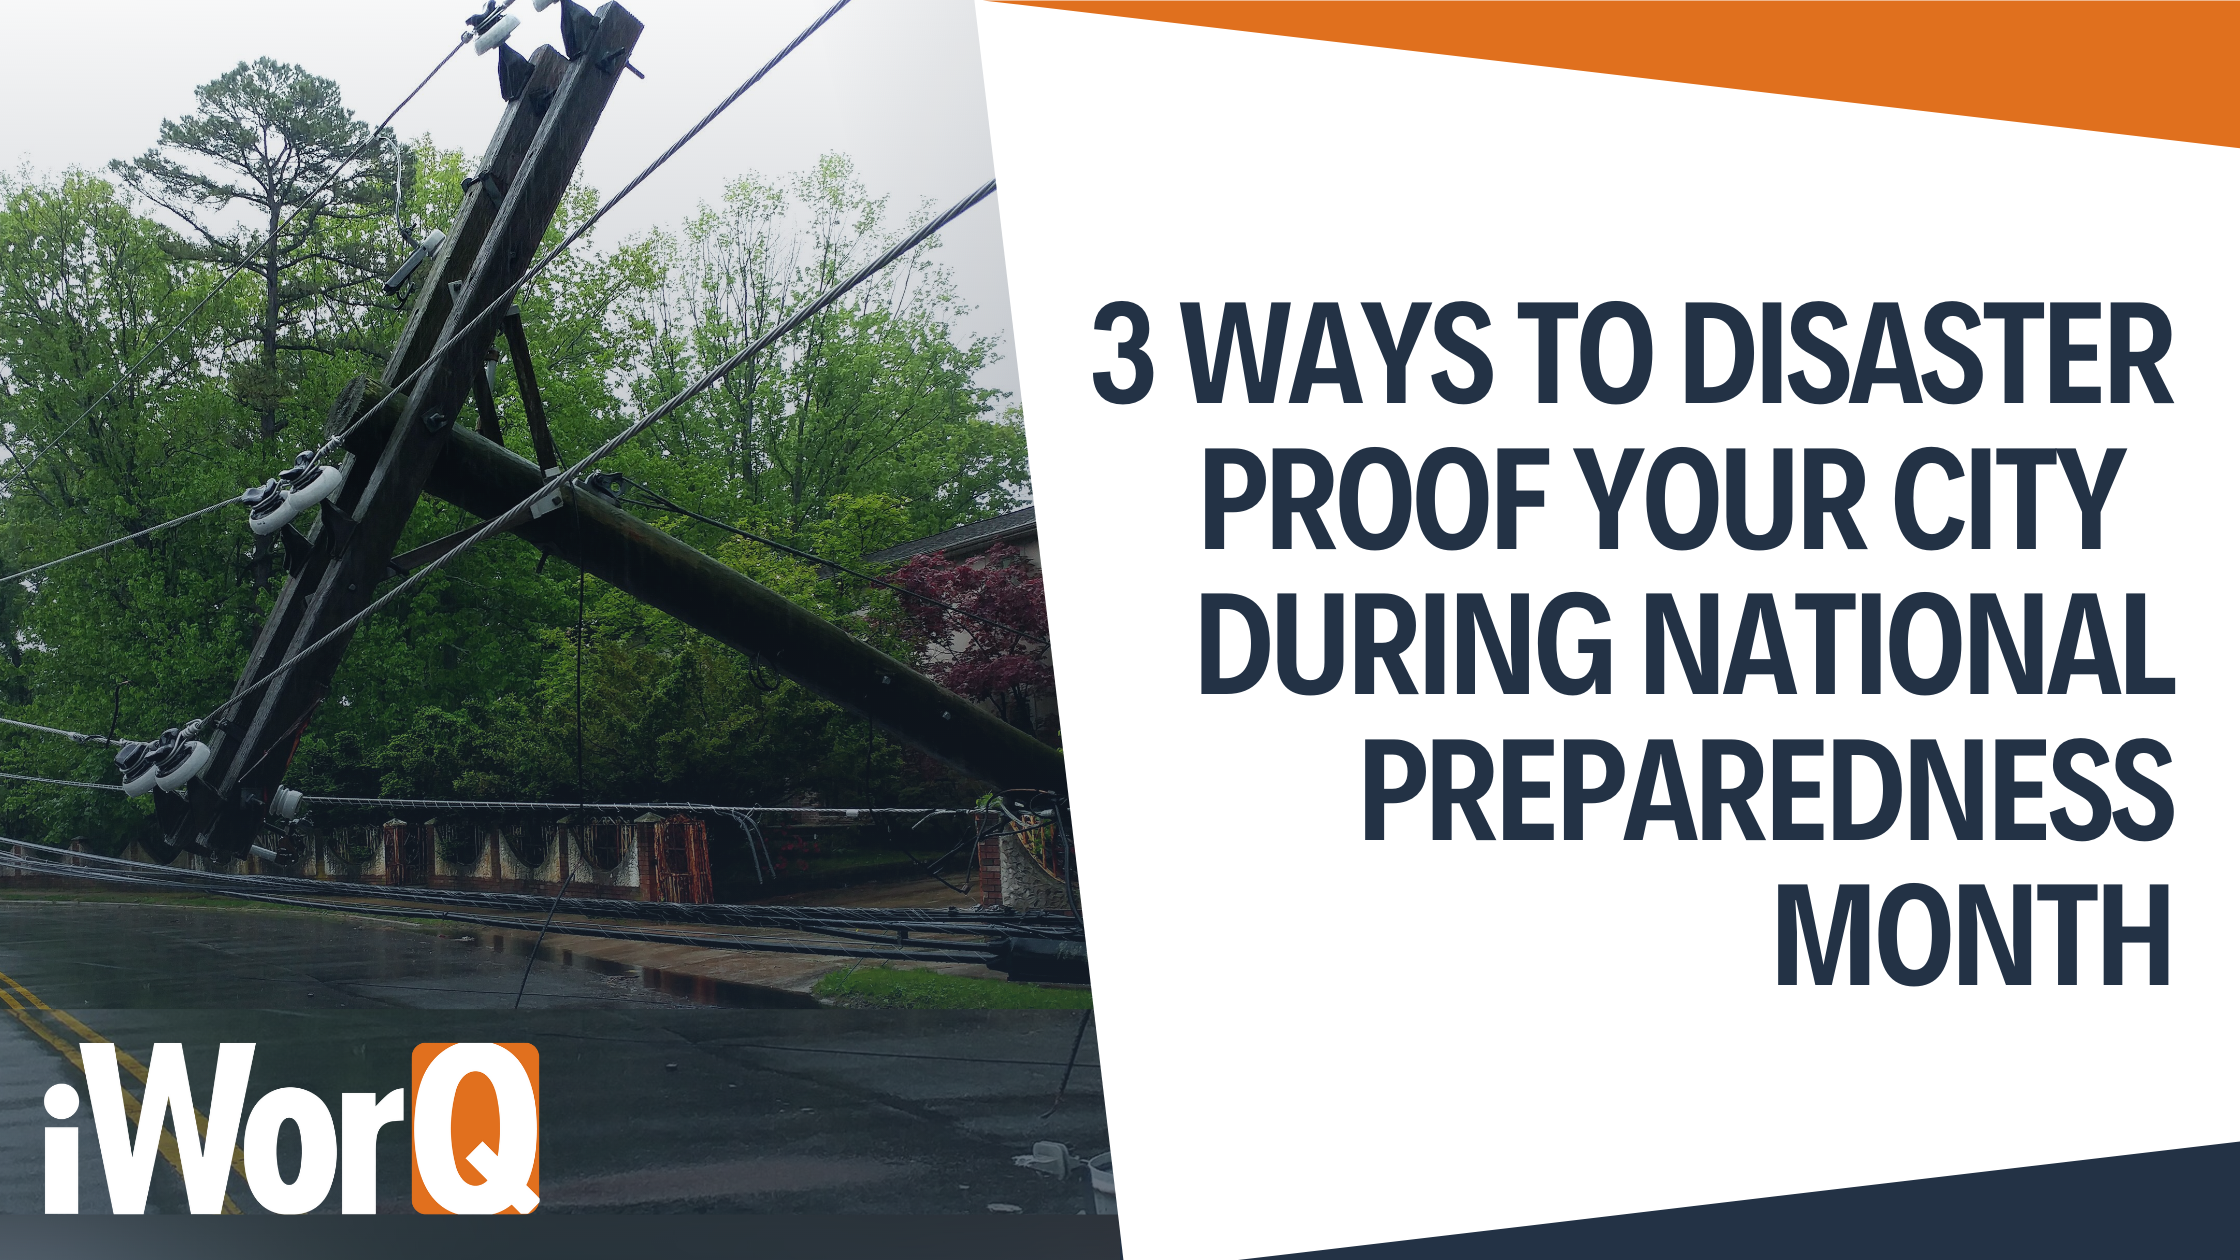 3 Ways to Disaster Proof Your City During National Preparedness Month